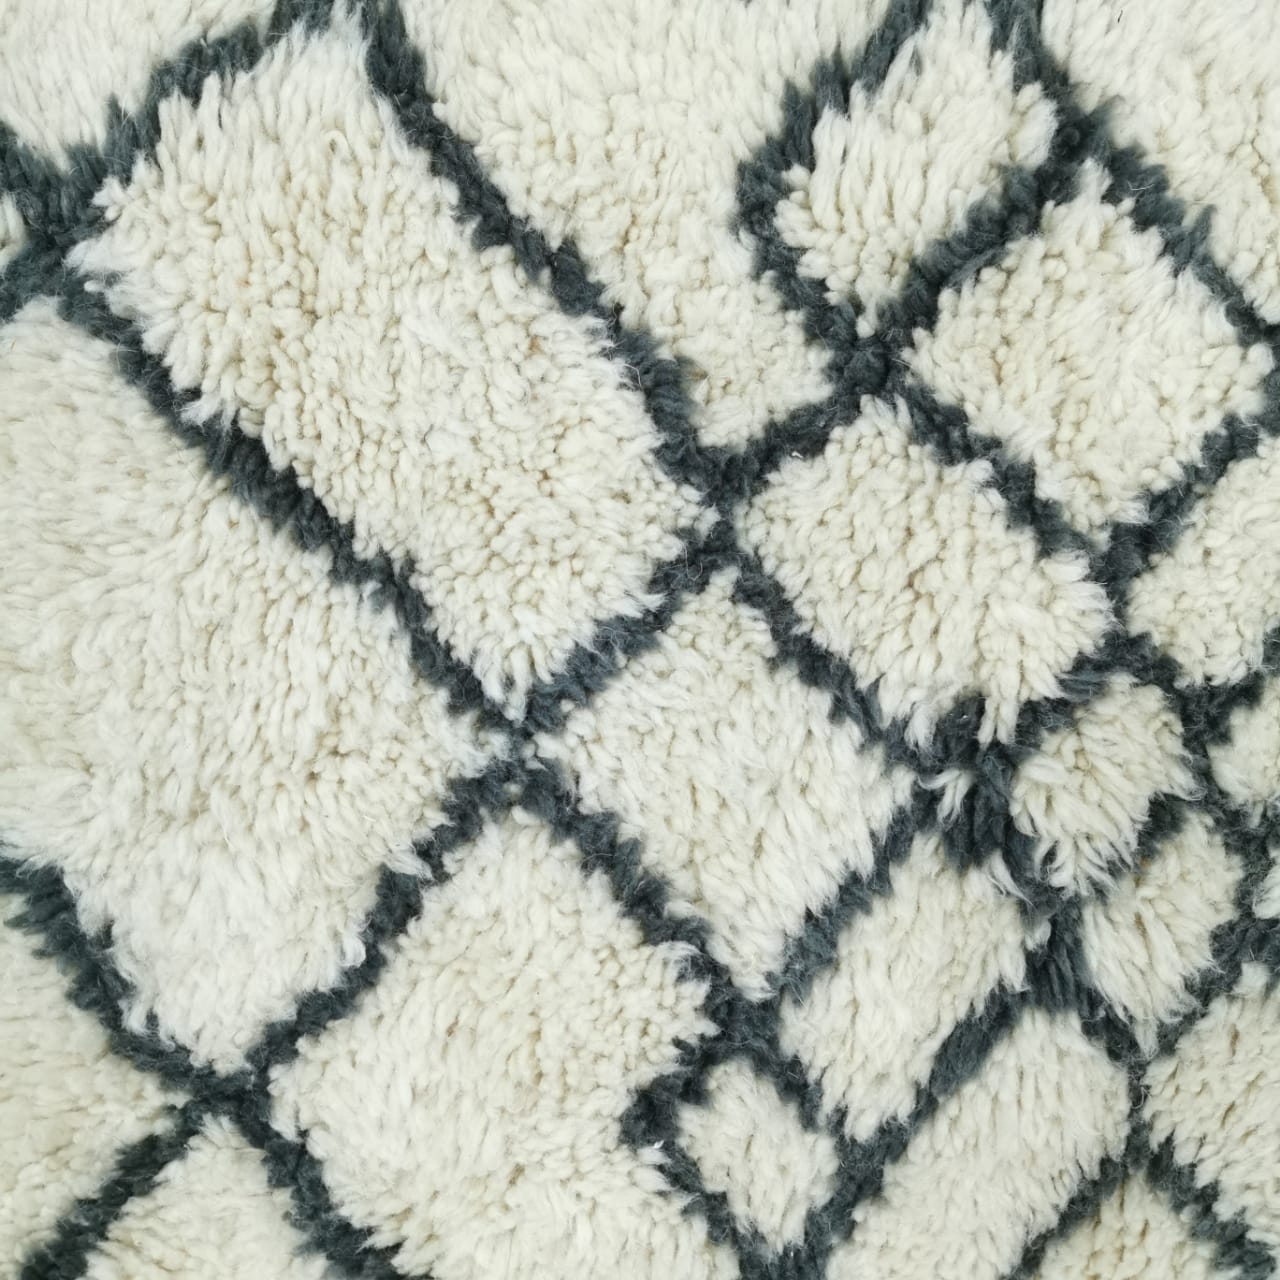 Black and White Wool Rug Handcrafted Moroccan Berber Carpet